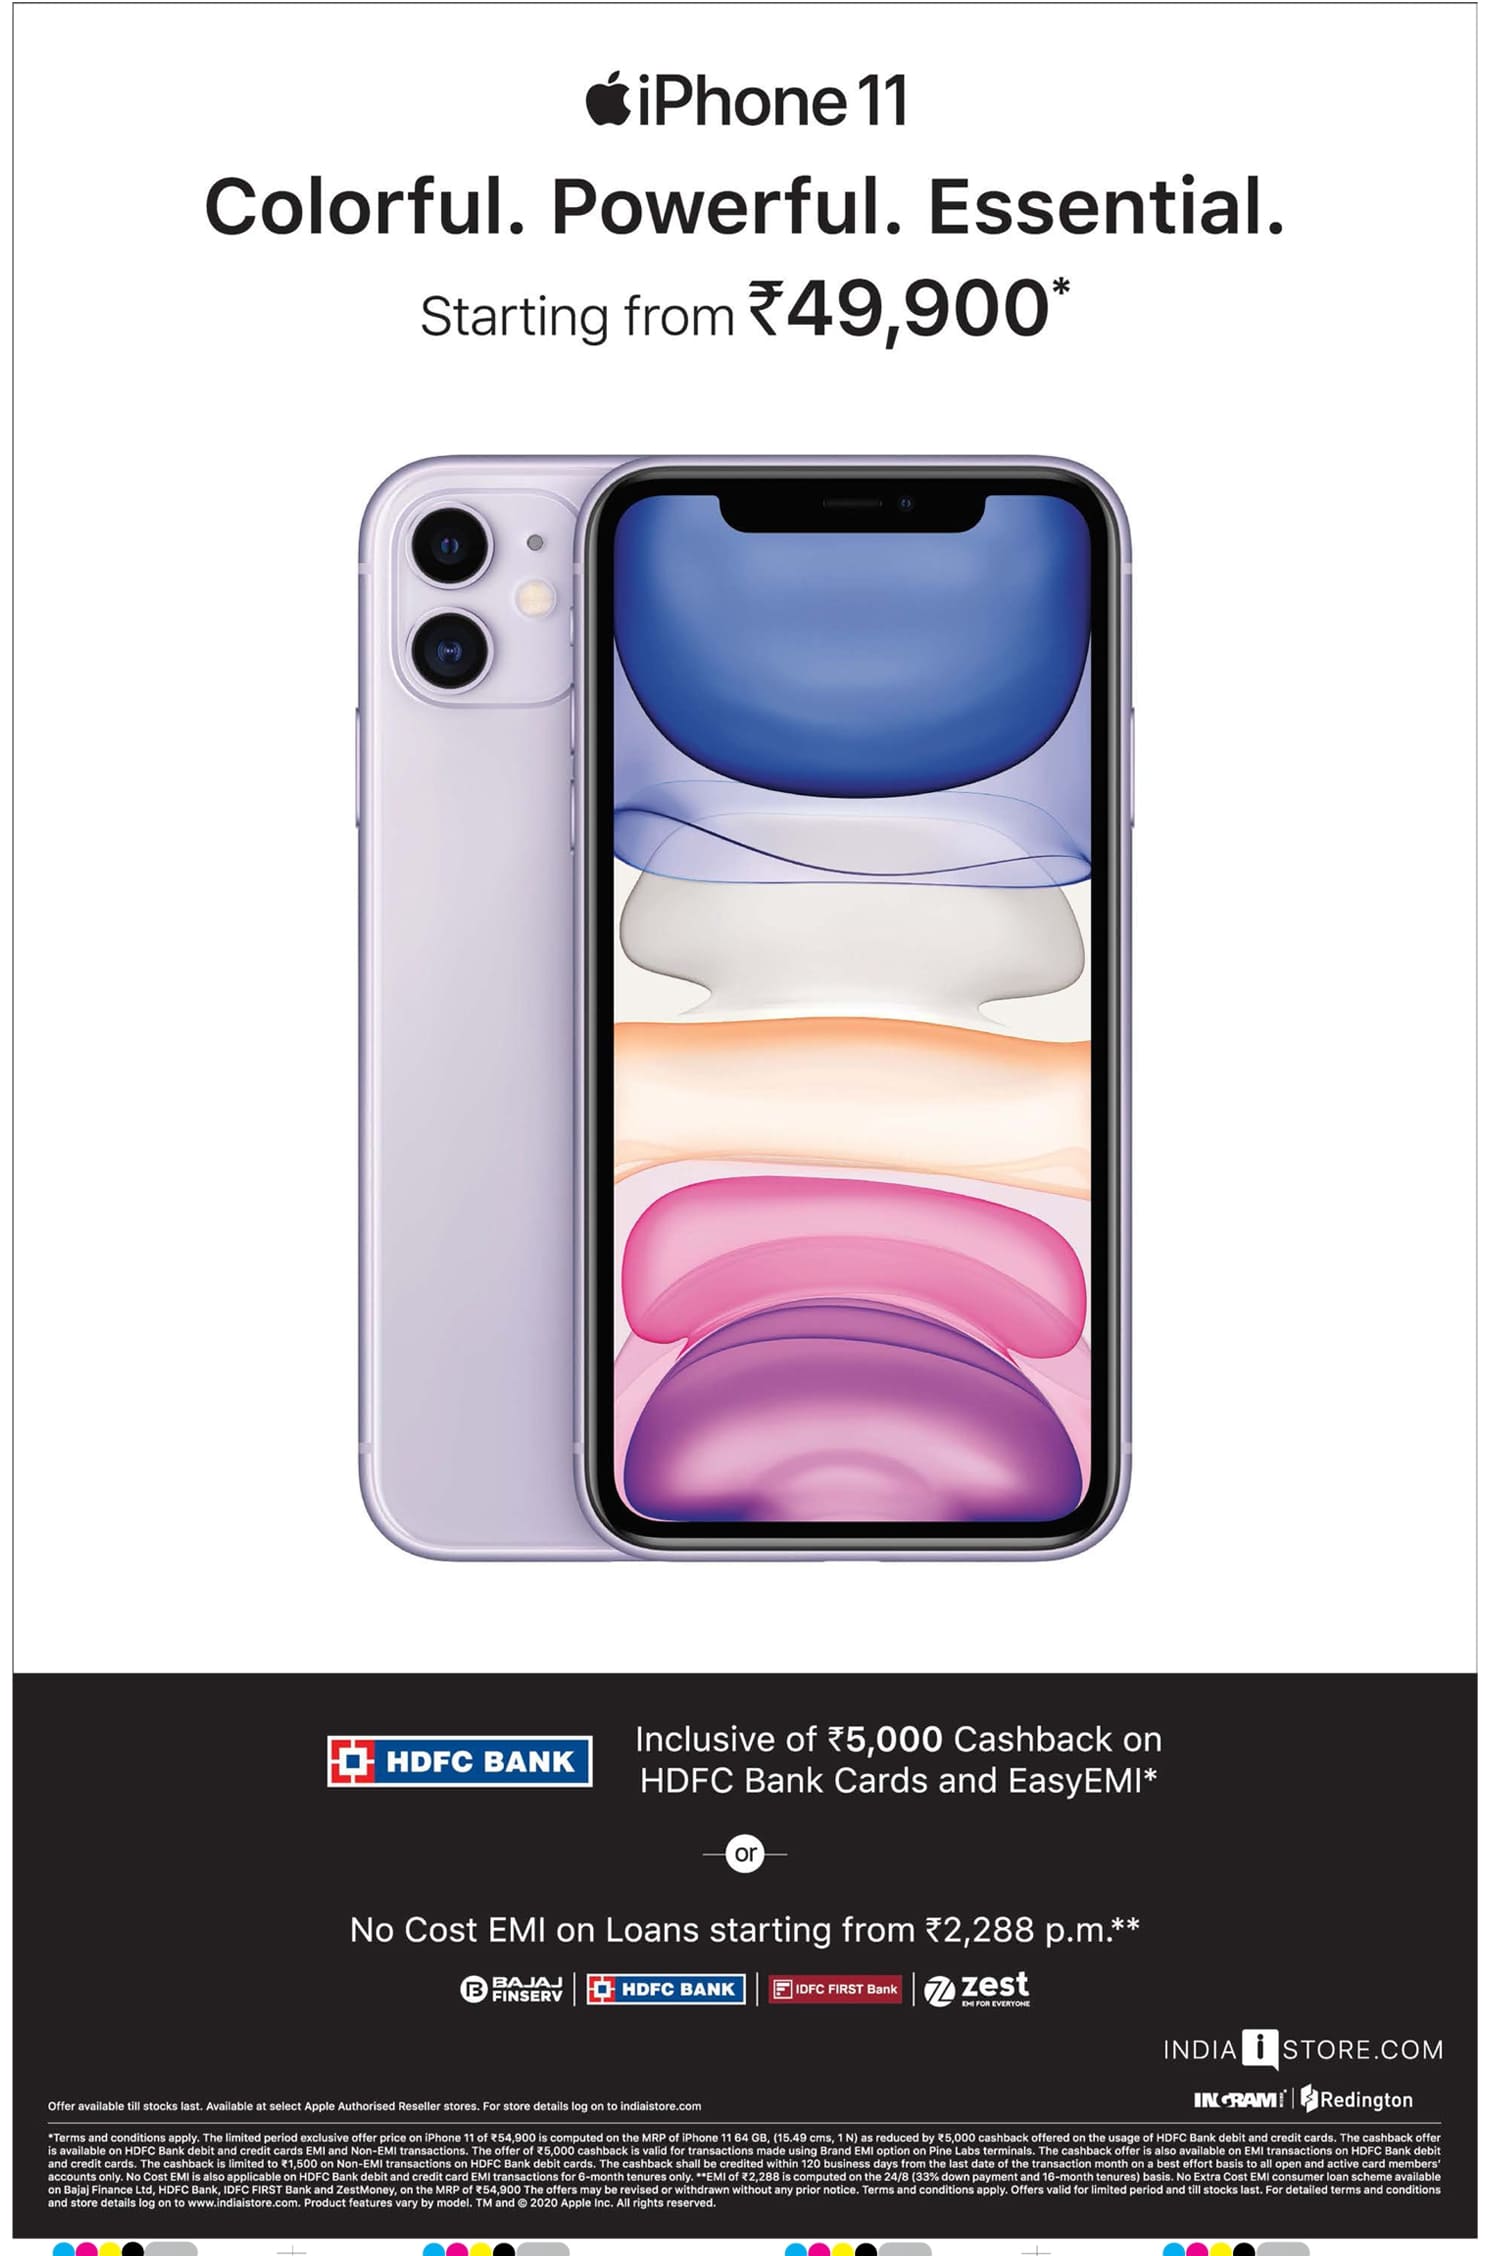 iphone-11-colorful-powerful-essential-starting-from-rs-49900-ad-deccan-chronicle-6-11-2020